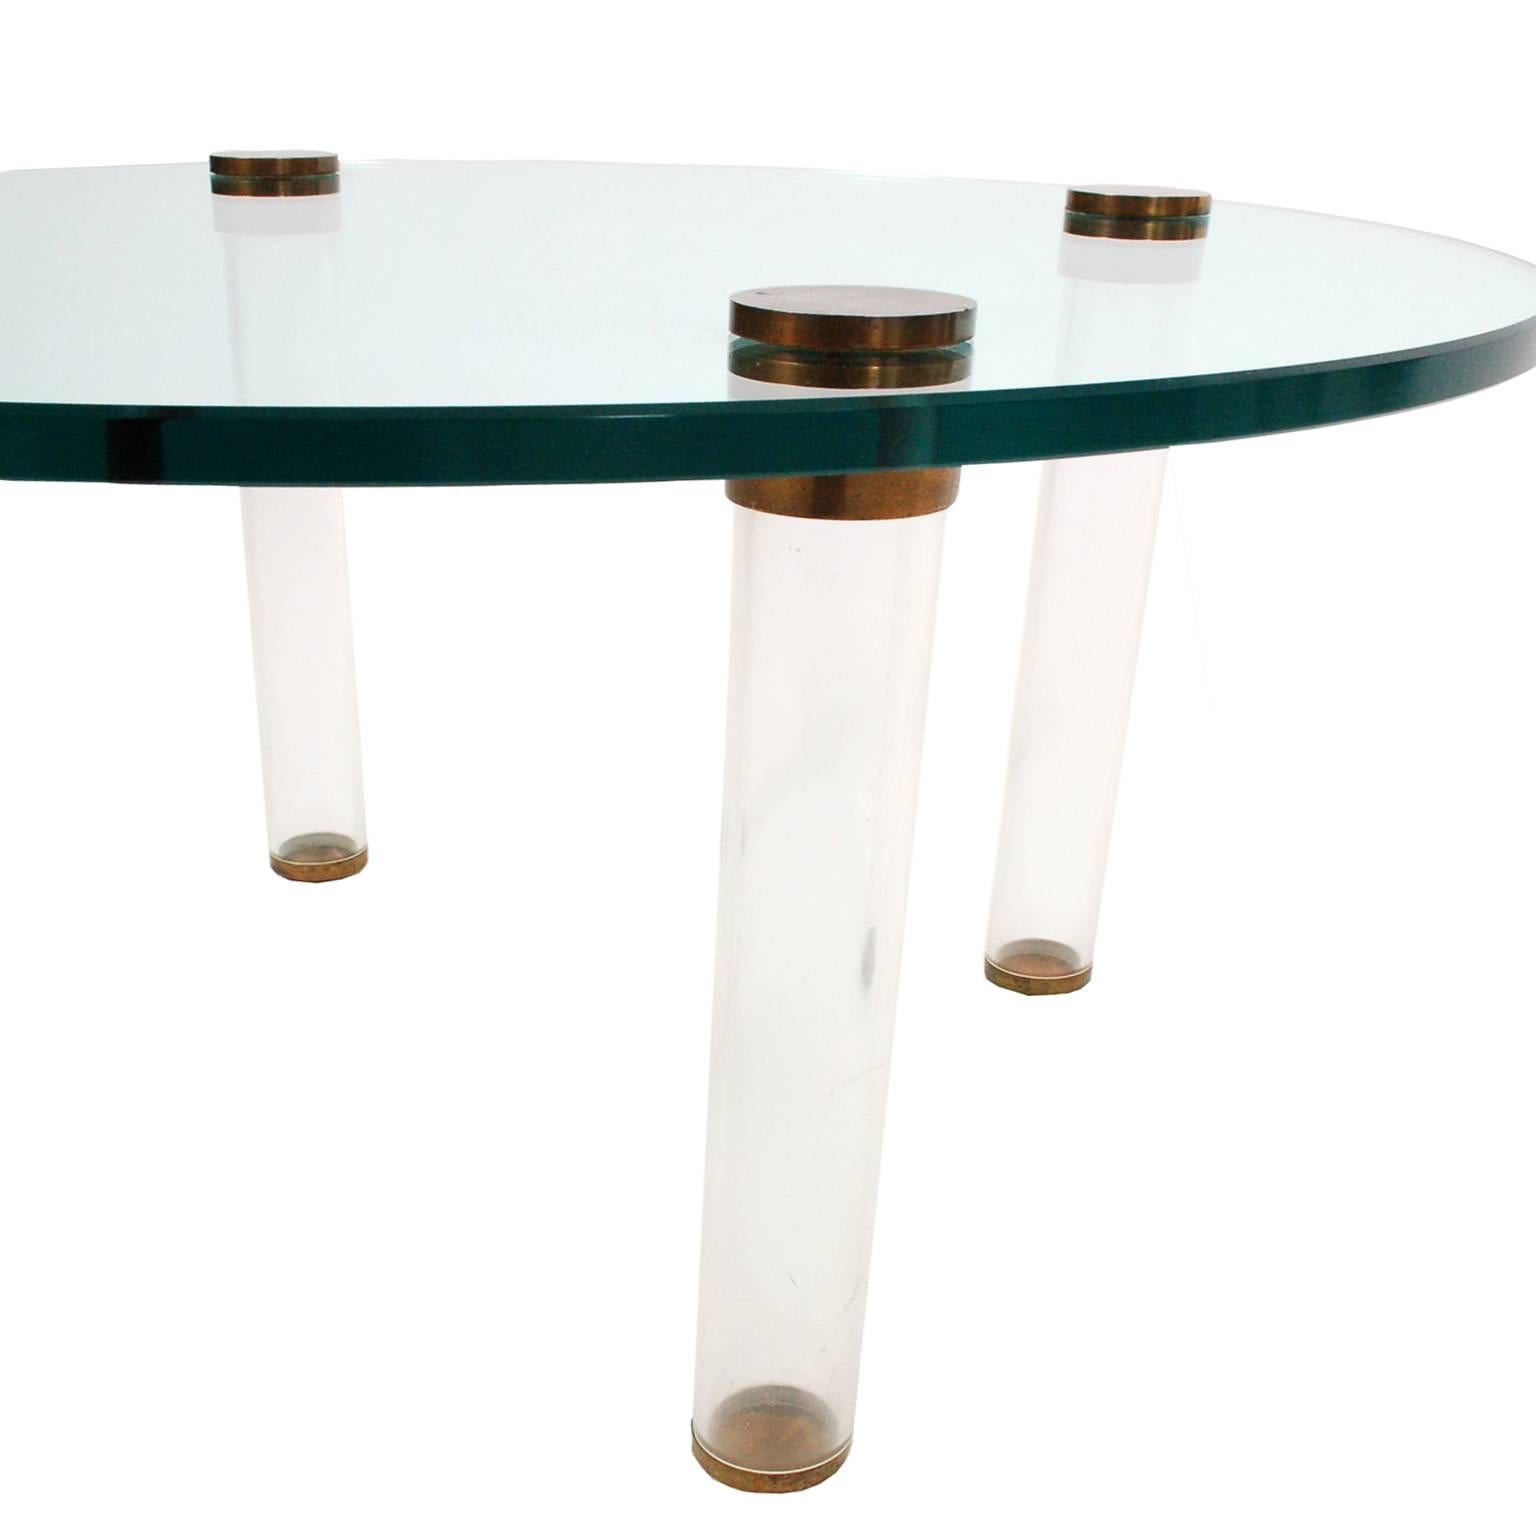 American Gilbert Rohde Occasional Table Manufactured by Herman Miller, 1939